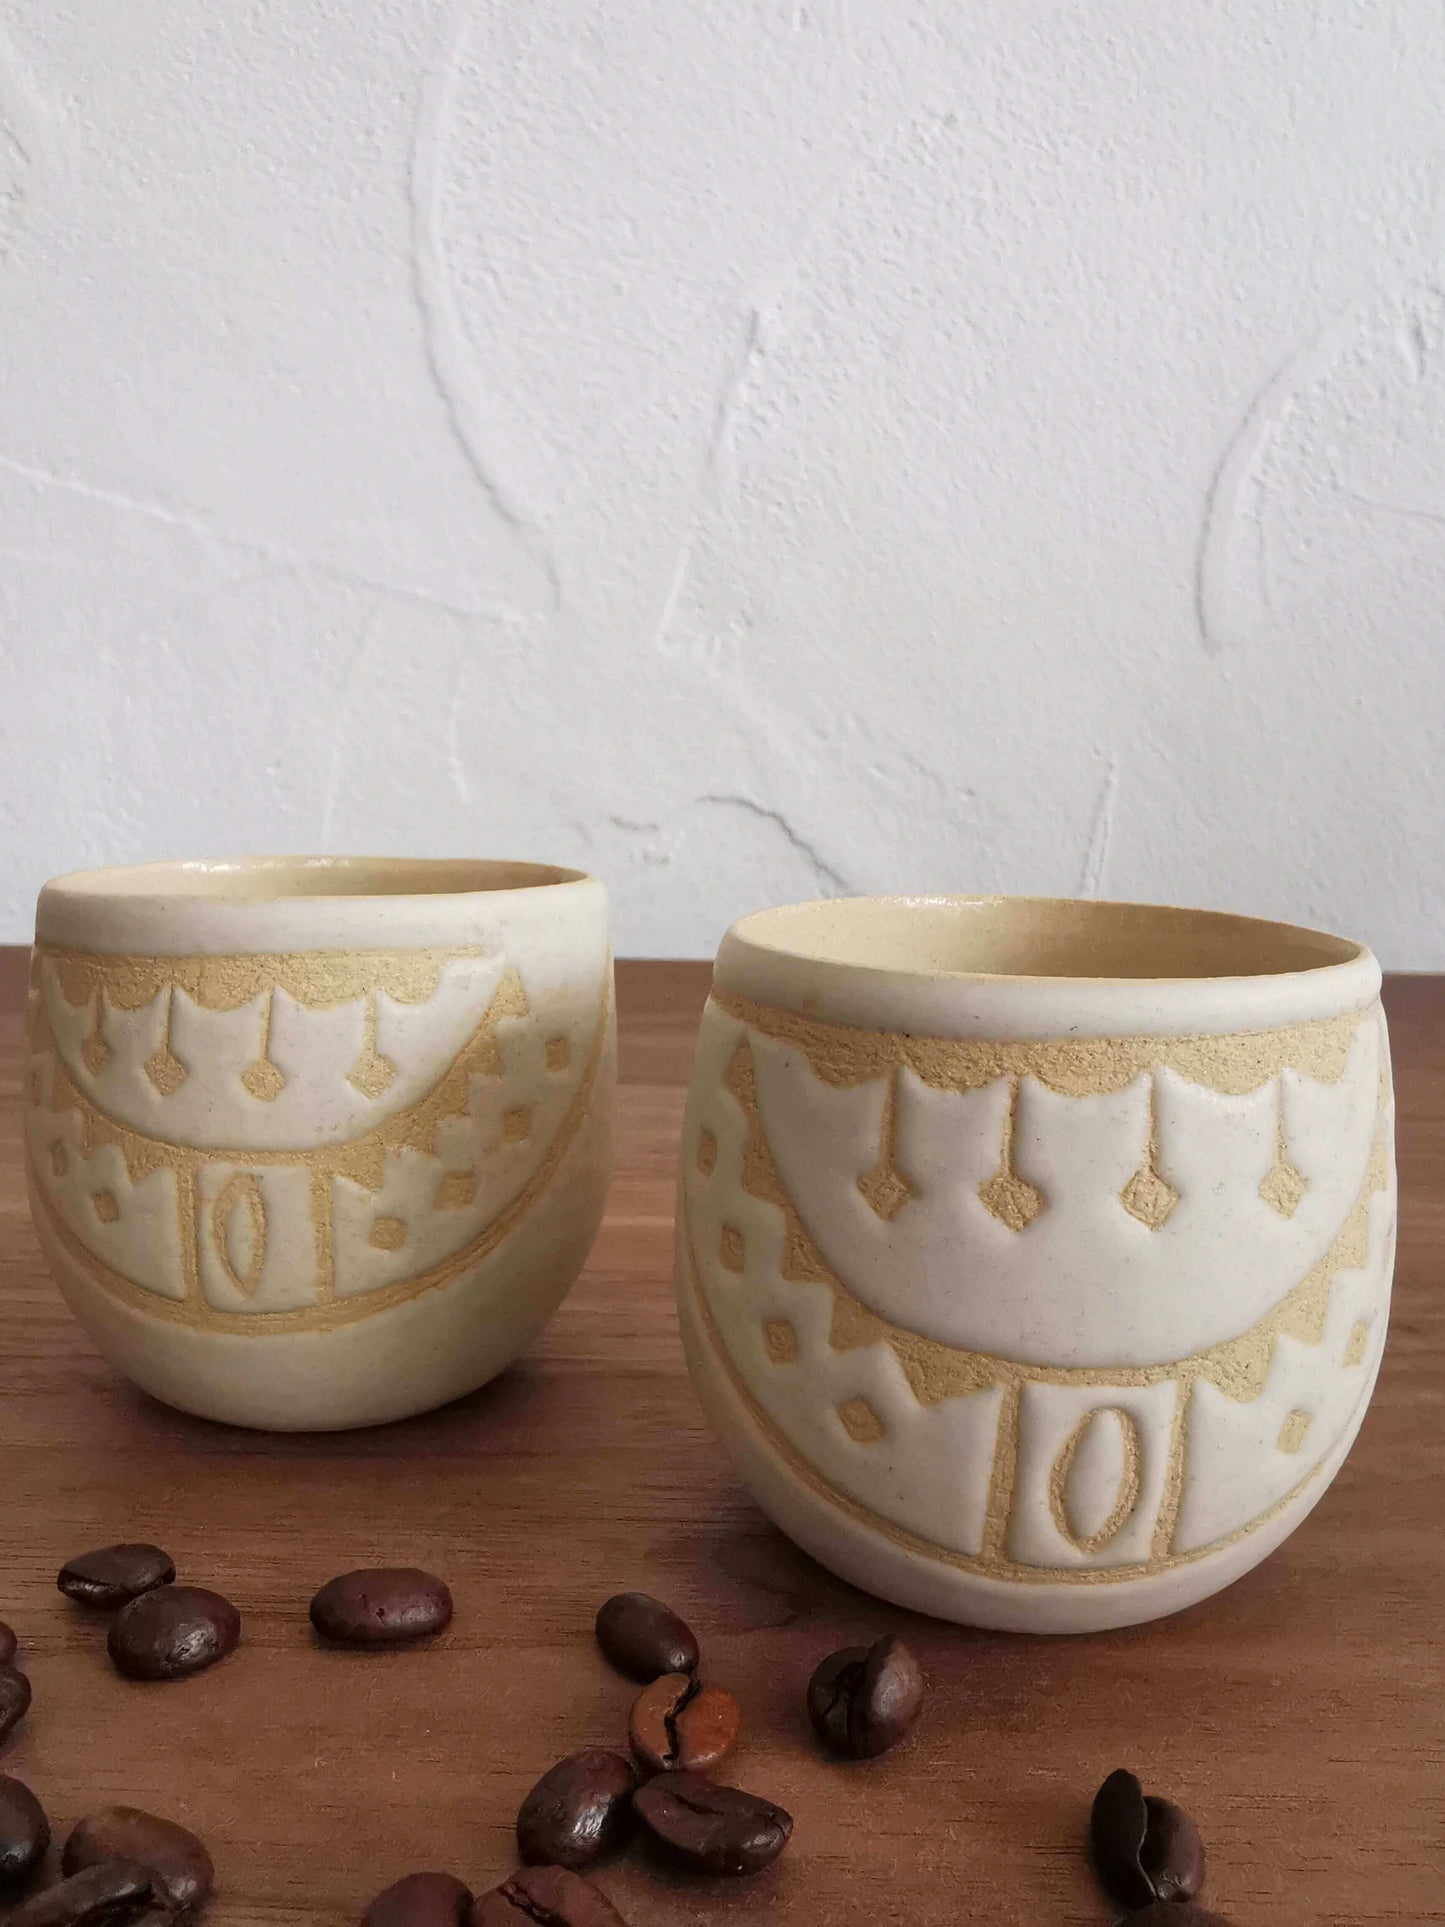 handmade pottery cup, pottery handmade, ceramic handmade pottery, Pottery dinnerware, handmade mug, Ramadan gift, mothers day gift, house warming gift, pottery cup small, Arabic calligraphy art, handwritten calligraphy, handwritten Arabic calligraphy